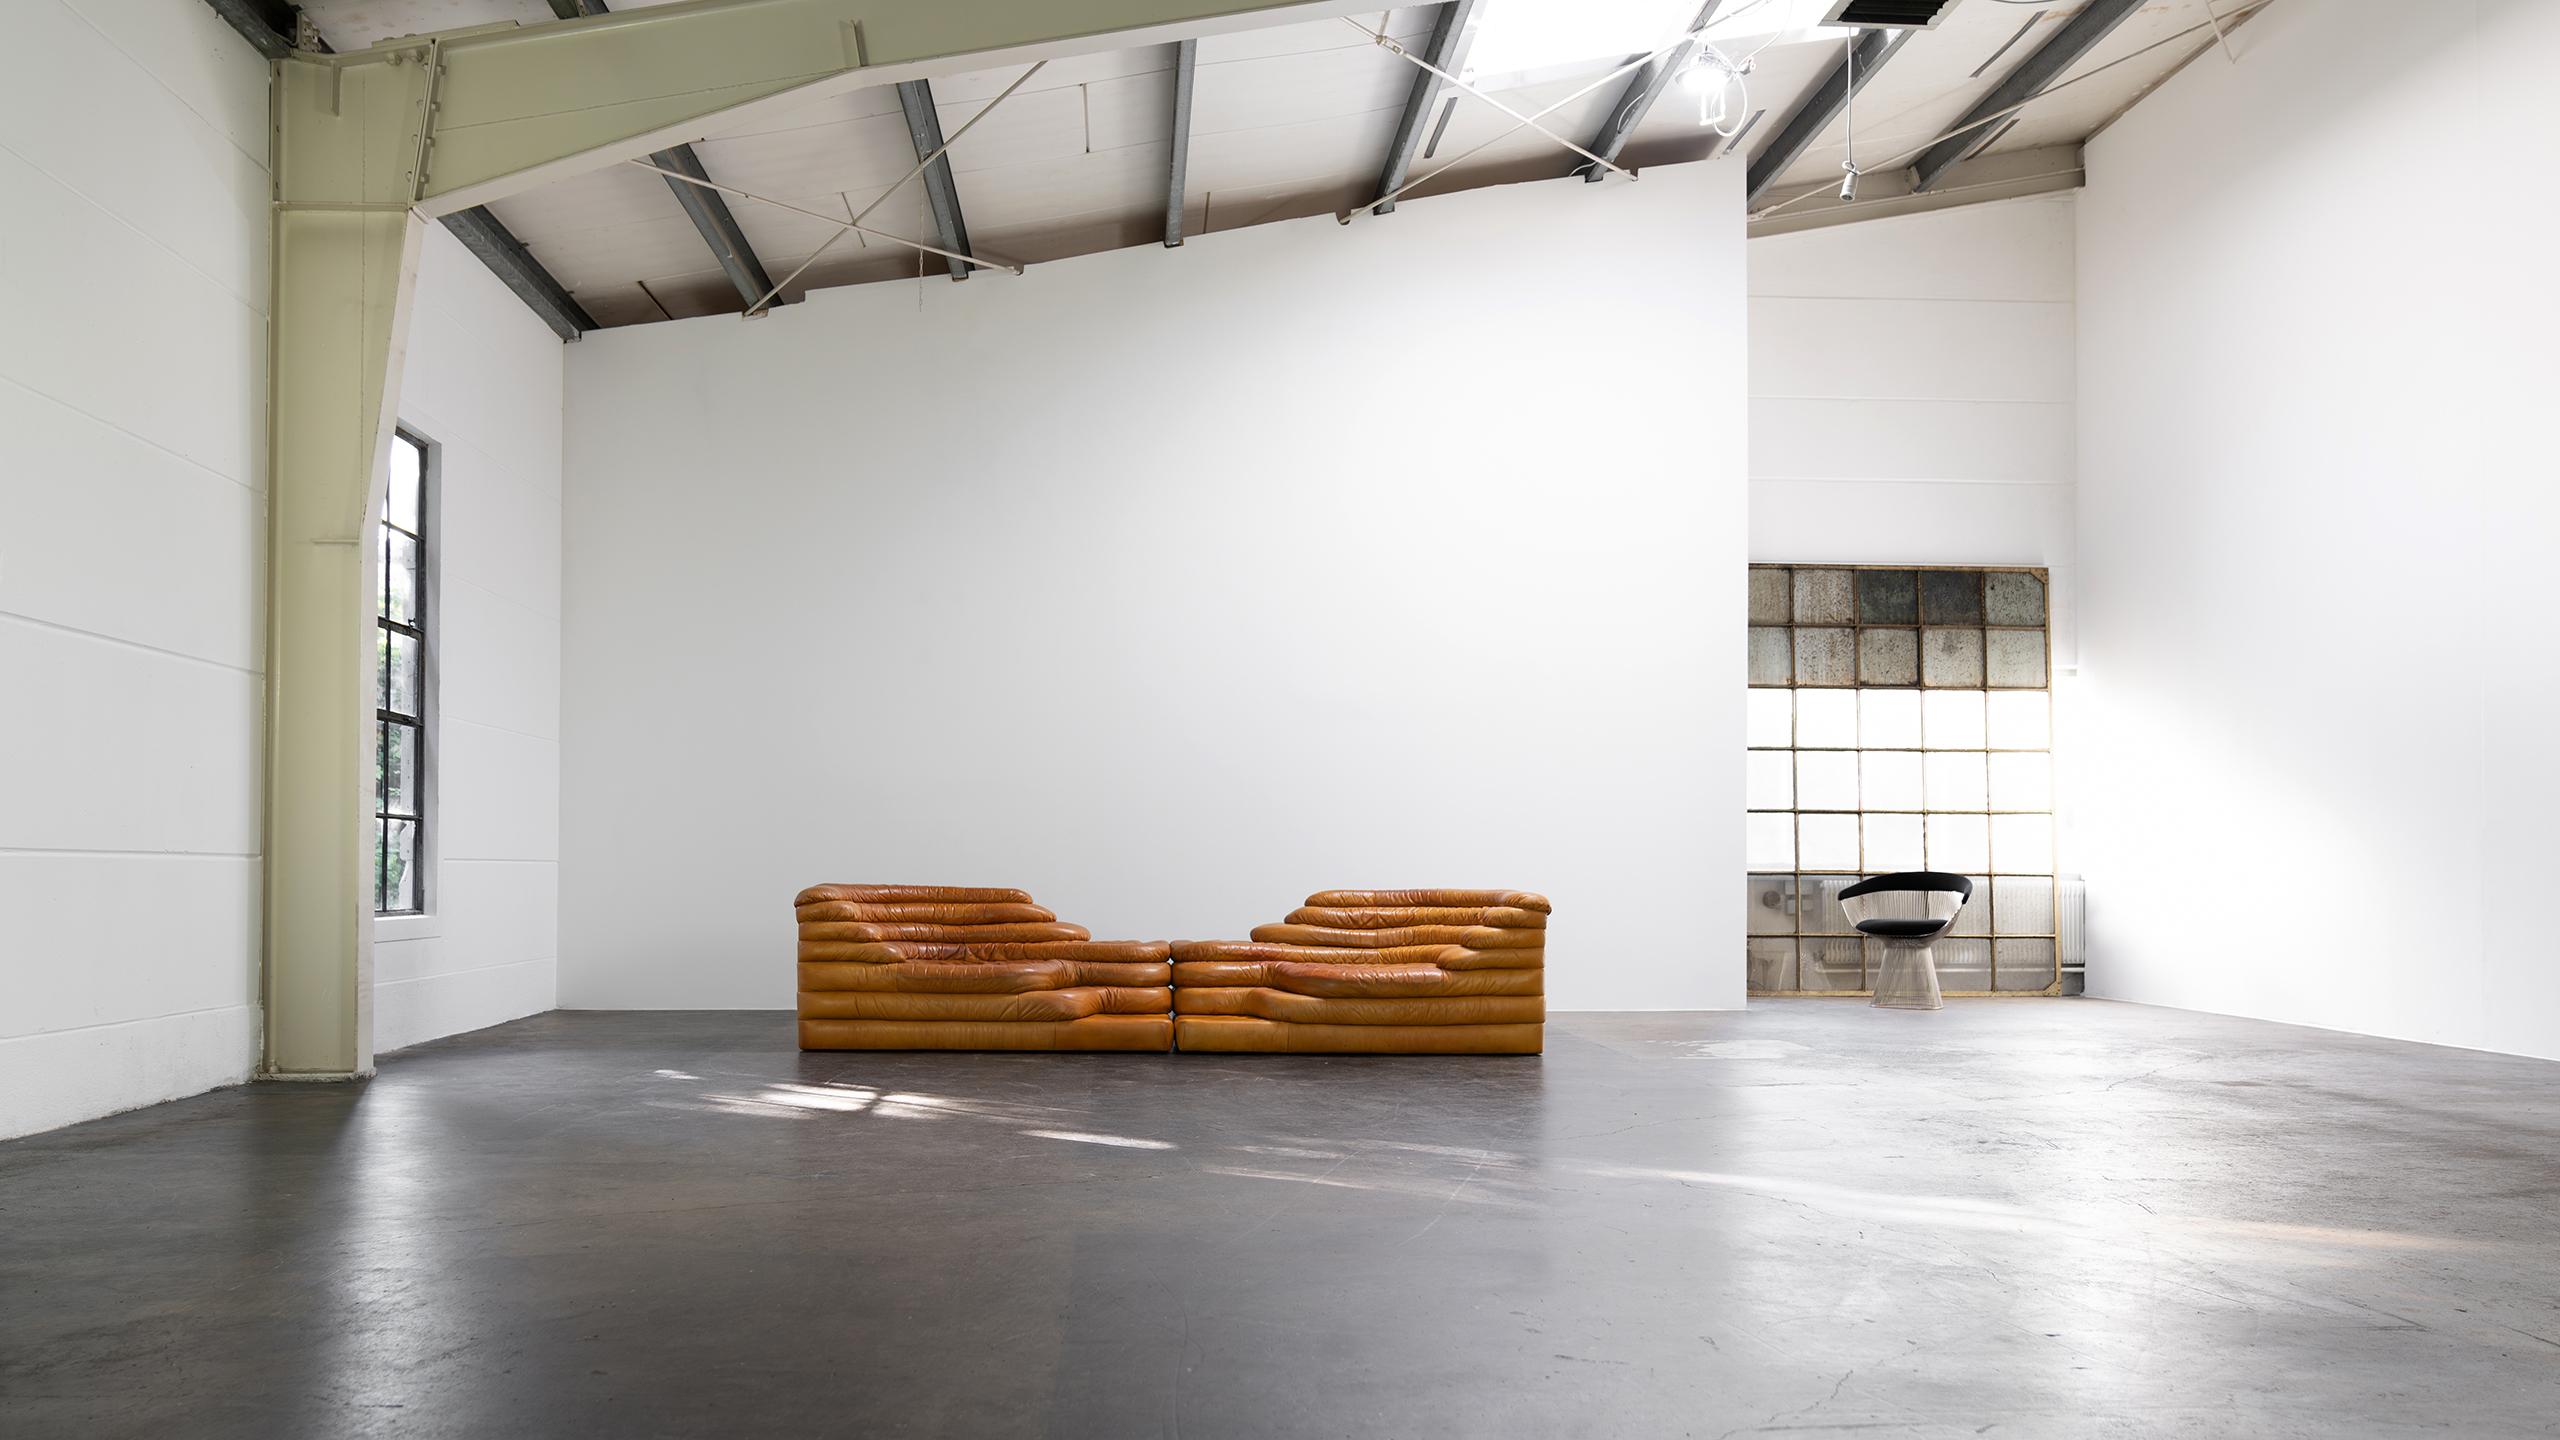 2x De Sede Terrazza sofas, model DS 1025 in cognac leather.
Designed in 1972 by Ubald Klug & Ueli Berger for De Sede, Switzerland.

Sophisticated design sofa elements form the perfect basis for implementing your own interior design and furnishing